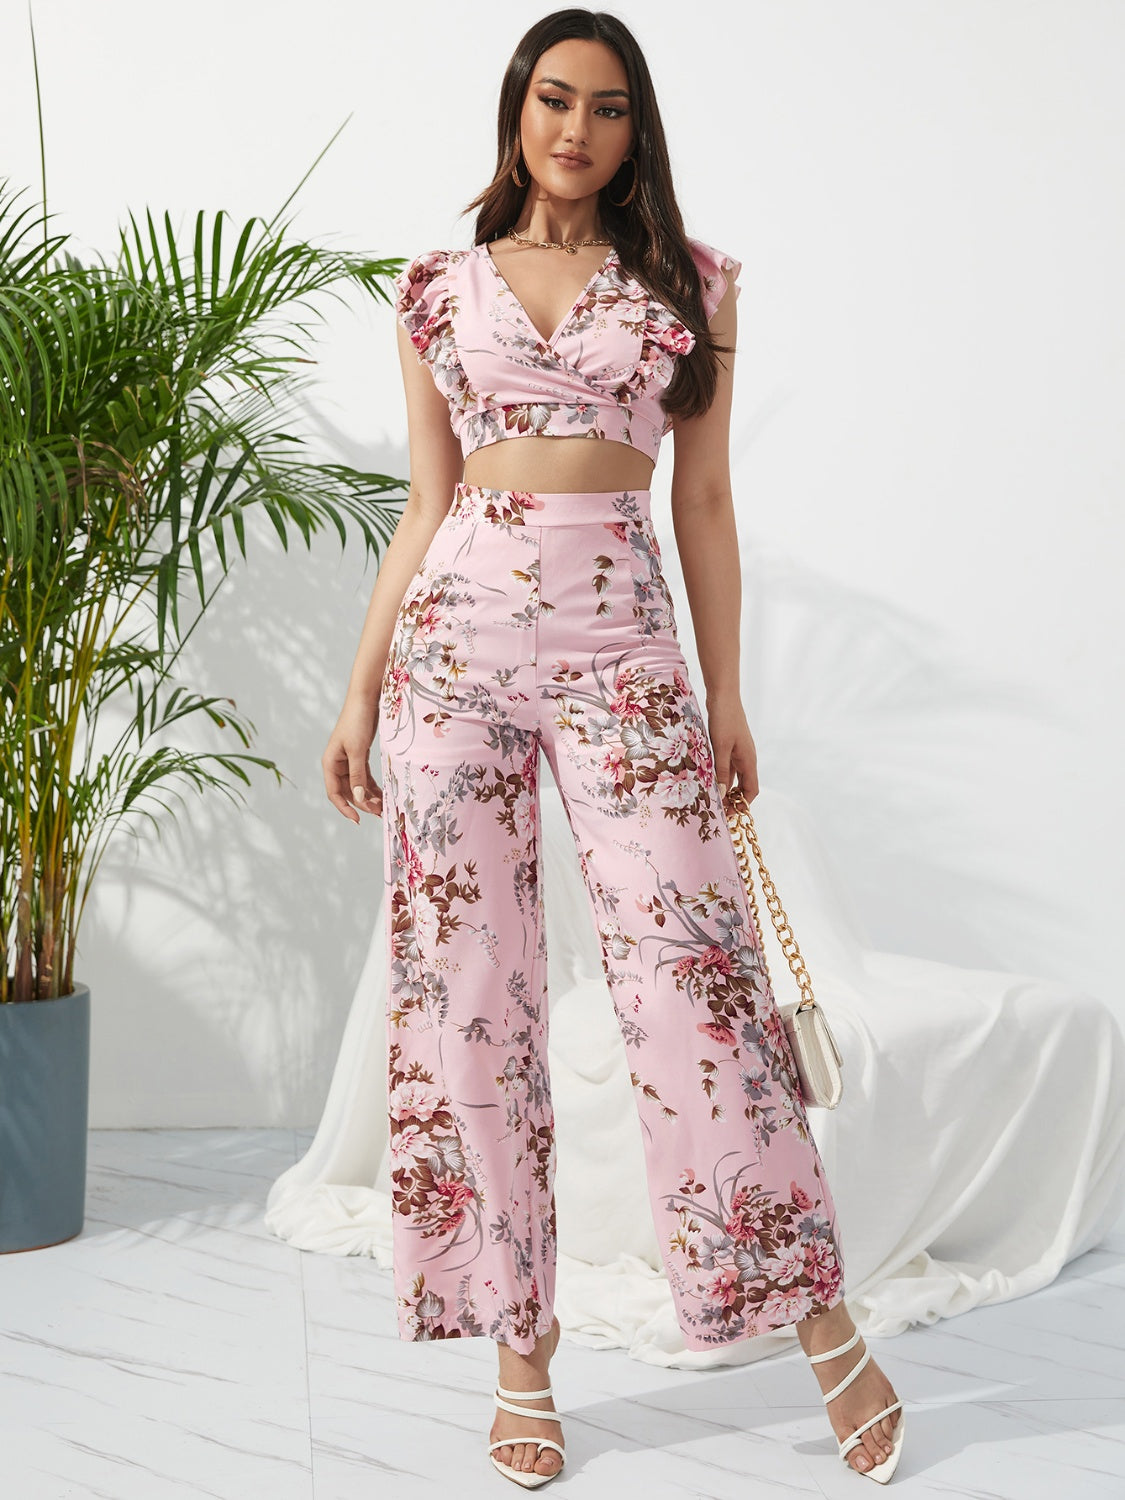 Belle of the Beach Top and Pants Set